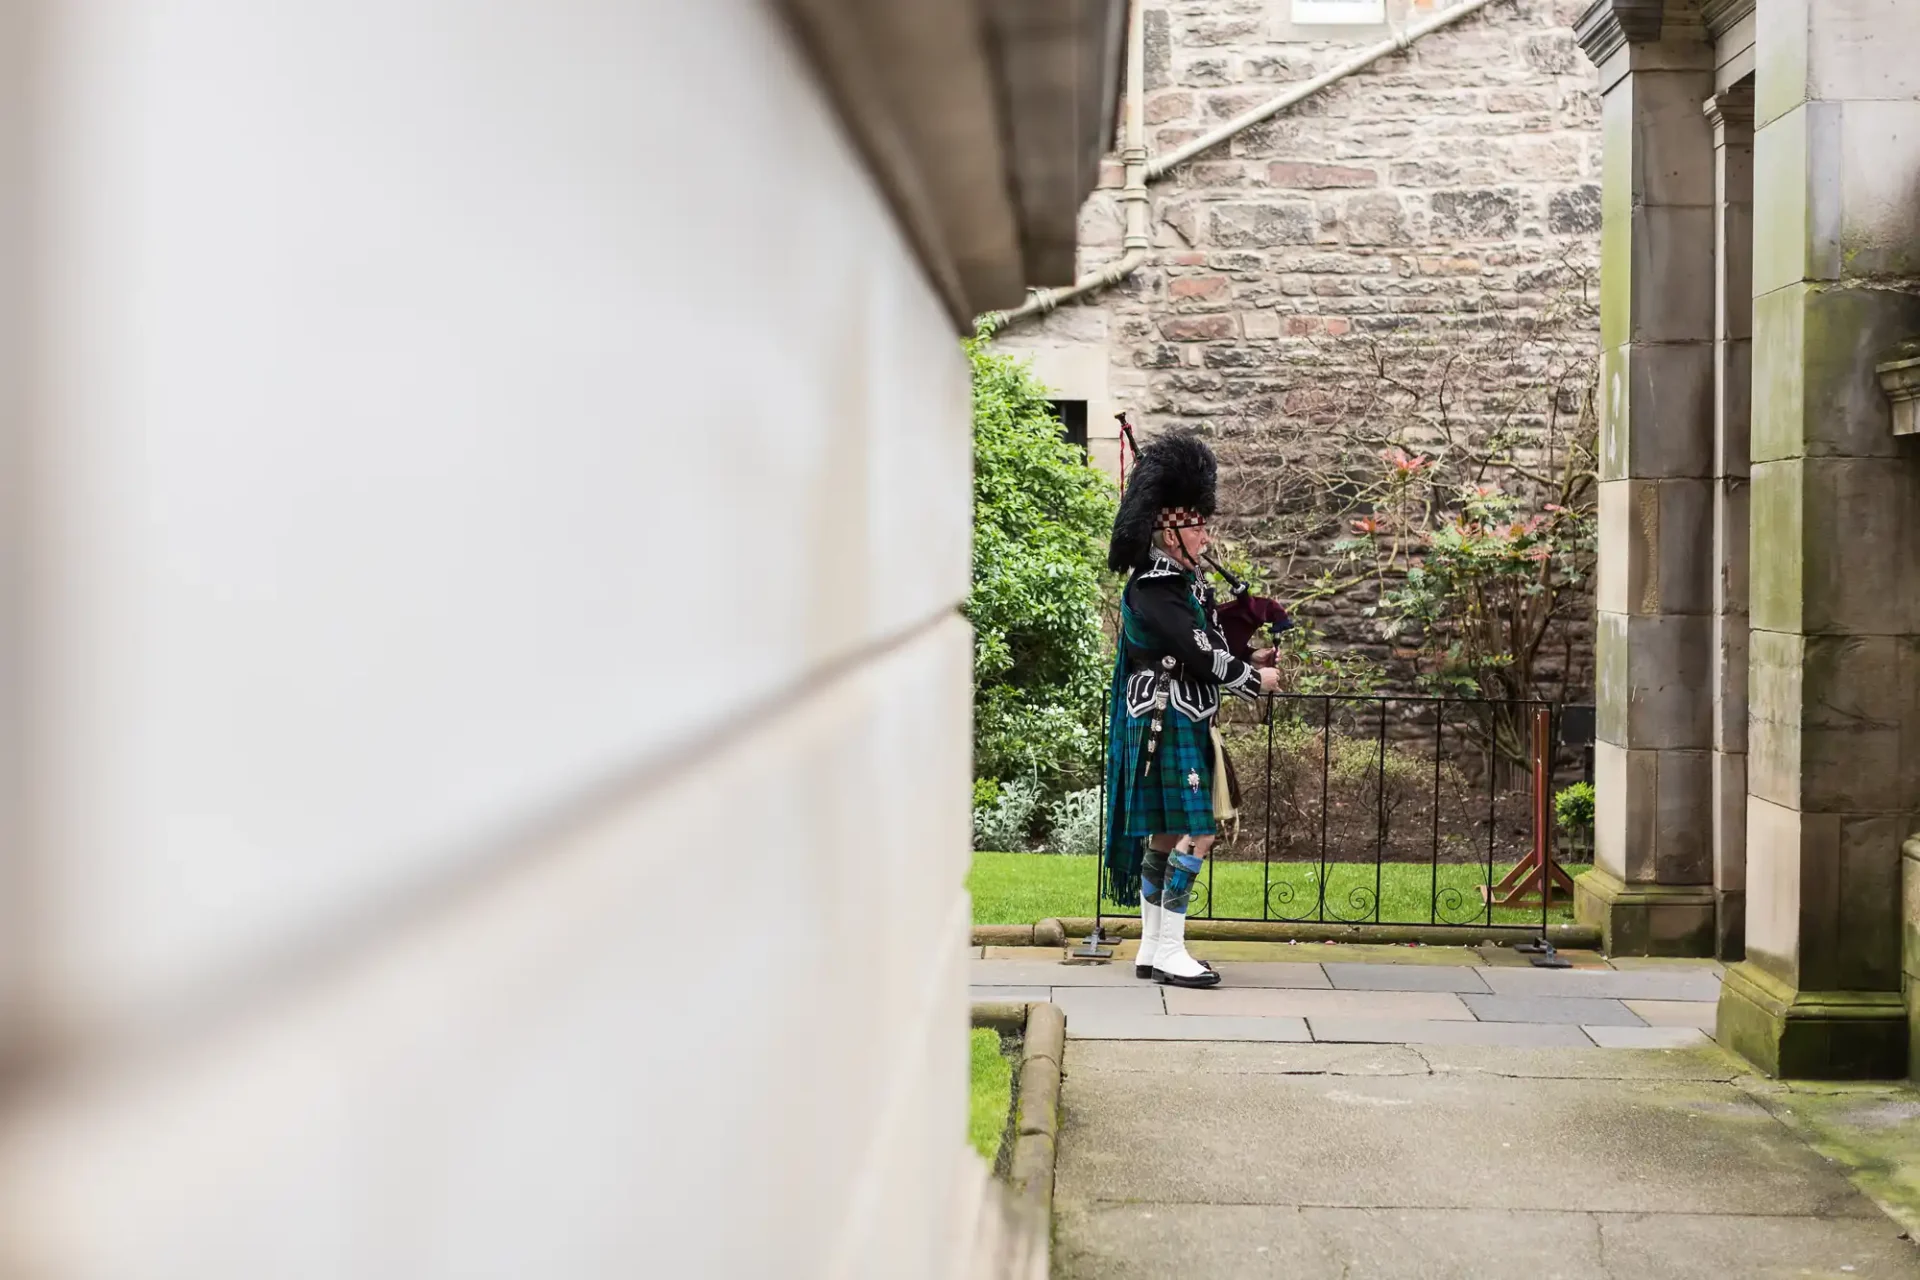 A bagpiper in traditional scottish attire playing in a historic courtyard, framed by blurred architectural details foreground.